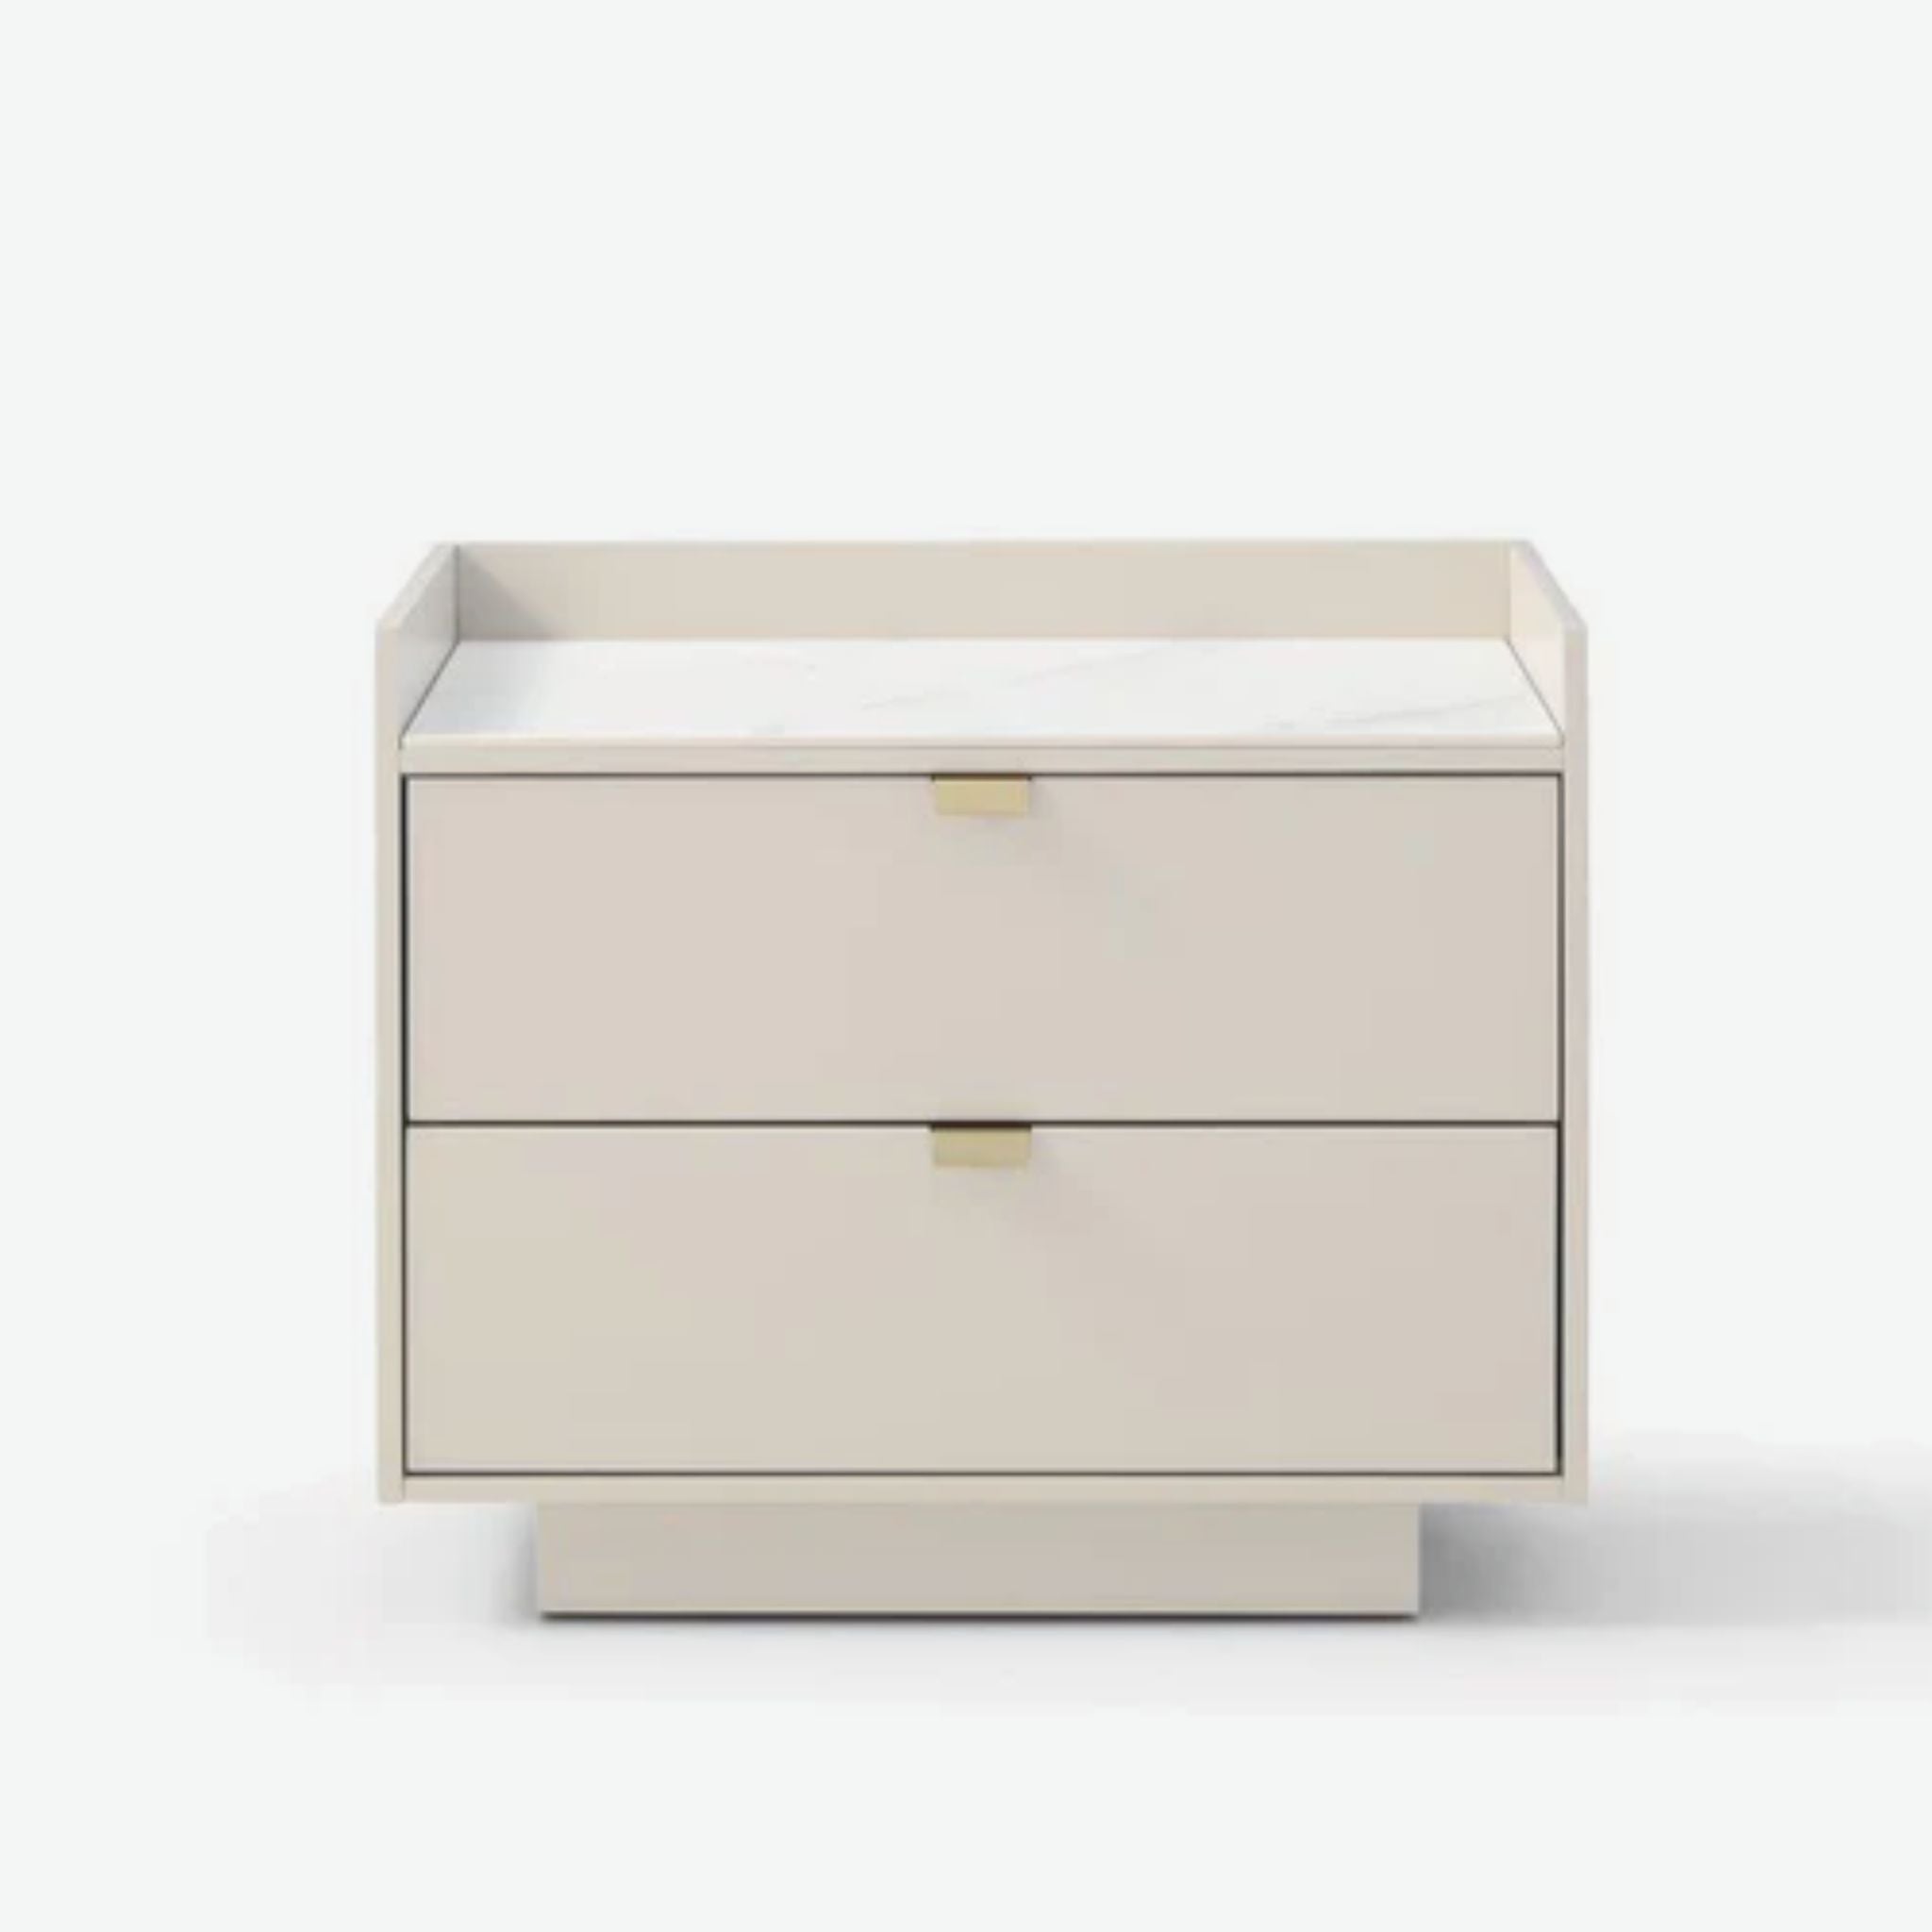 Tommy Franks Saviour Bedside Table - White Marble & Beige